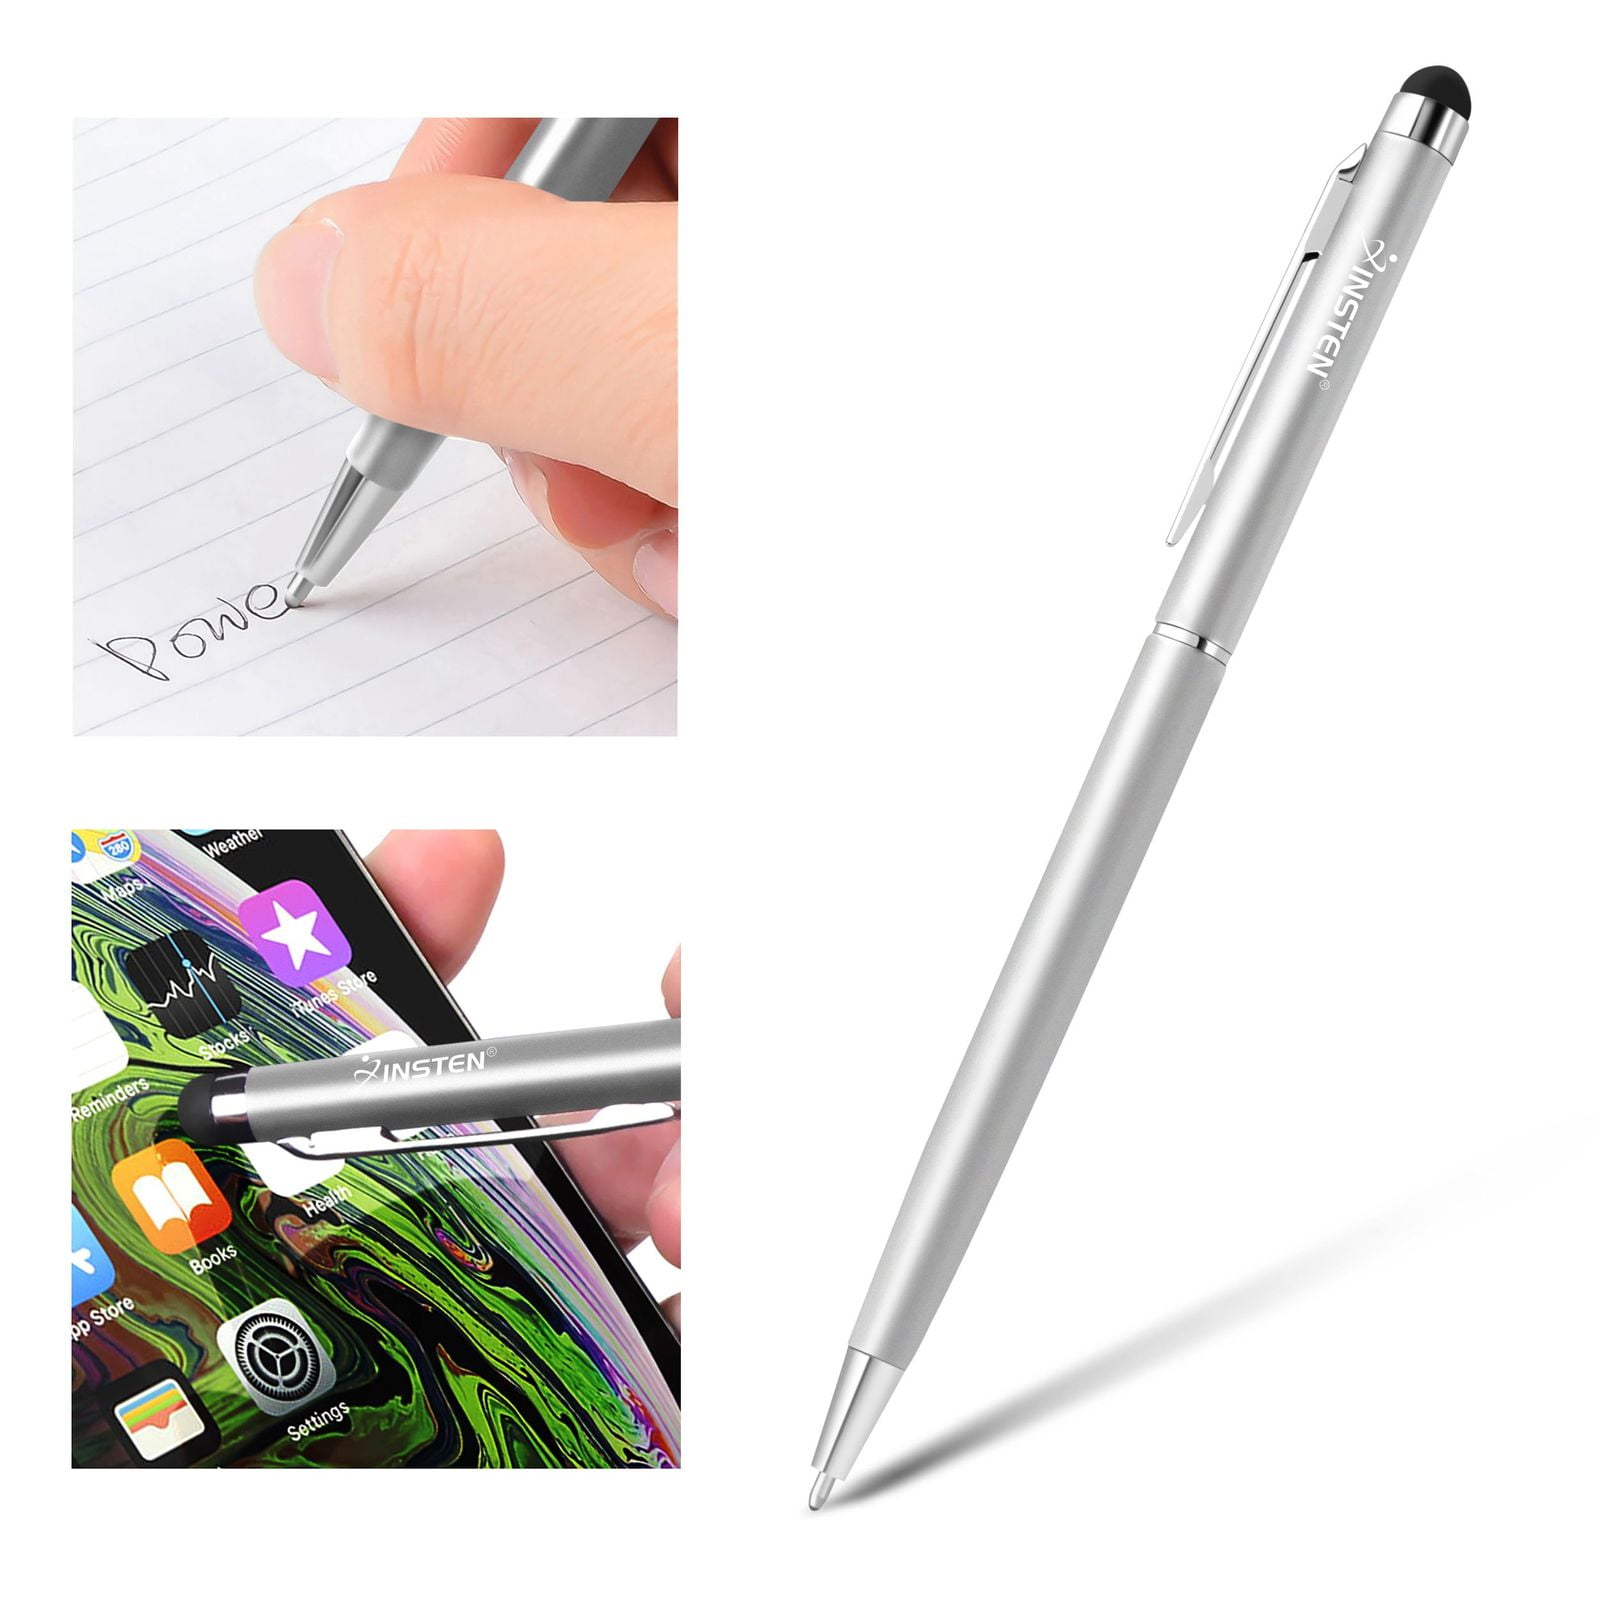 8x COLORFUL Capacitive Pen Touch Stylus FOR PC Tablet 9.7" 10" 10.1" 4th 